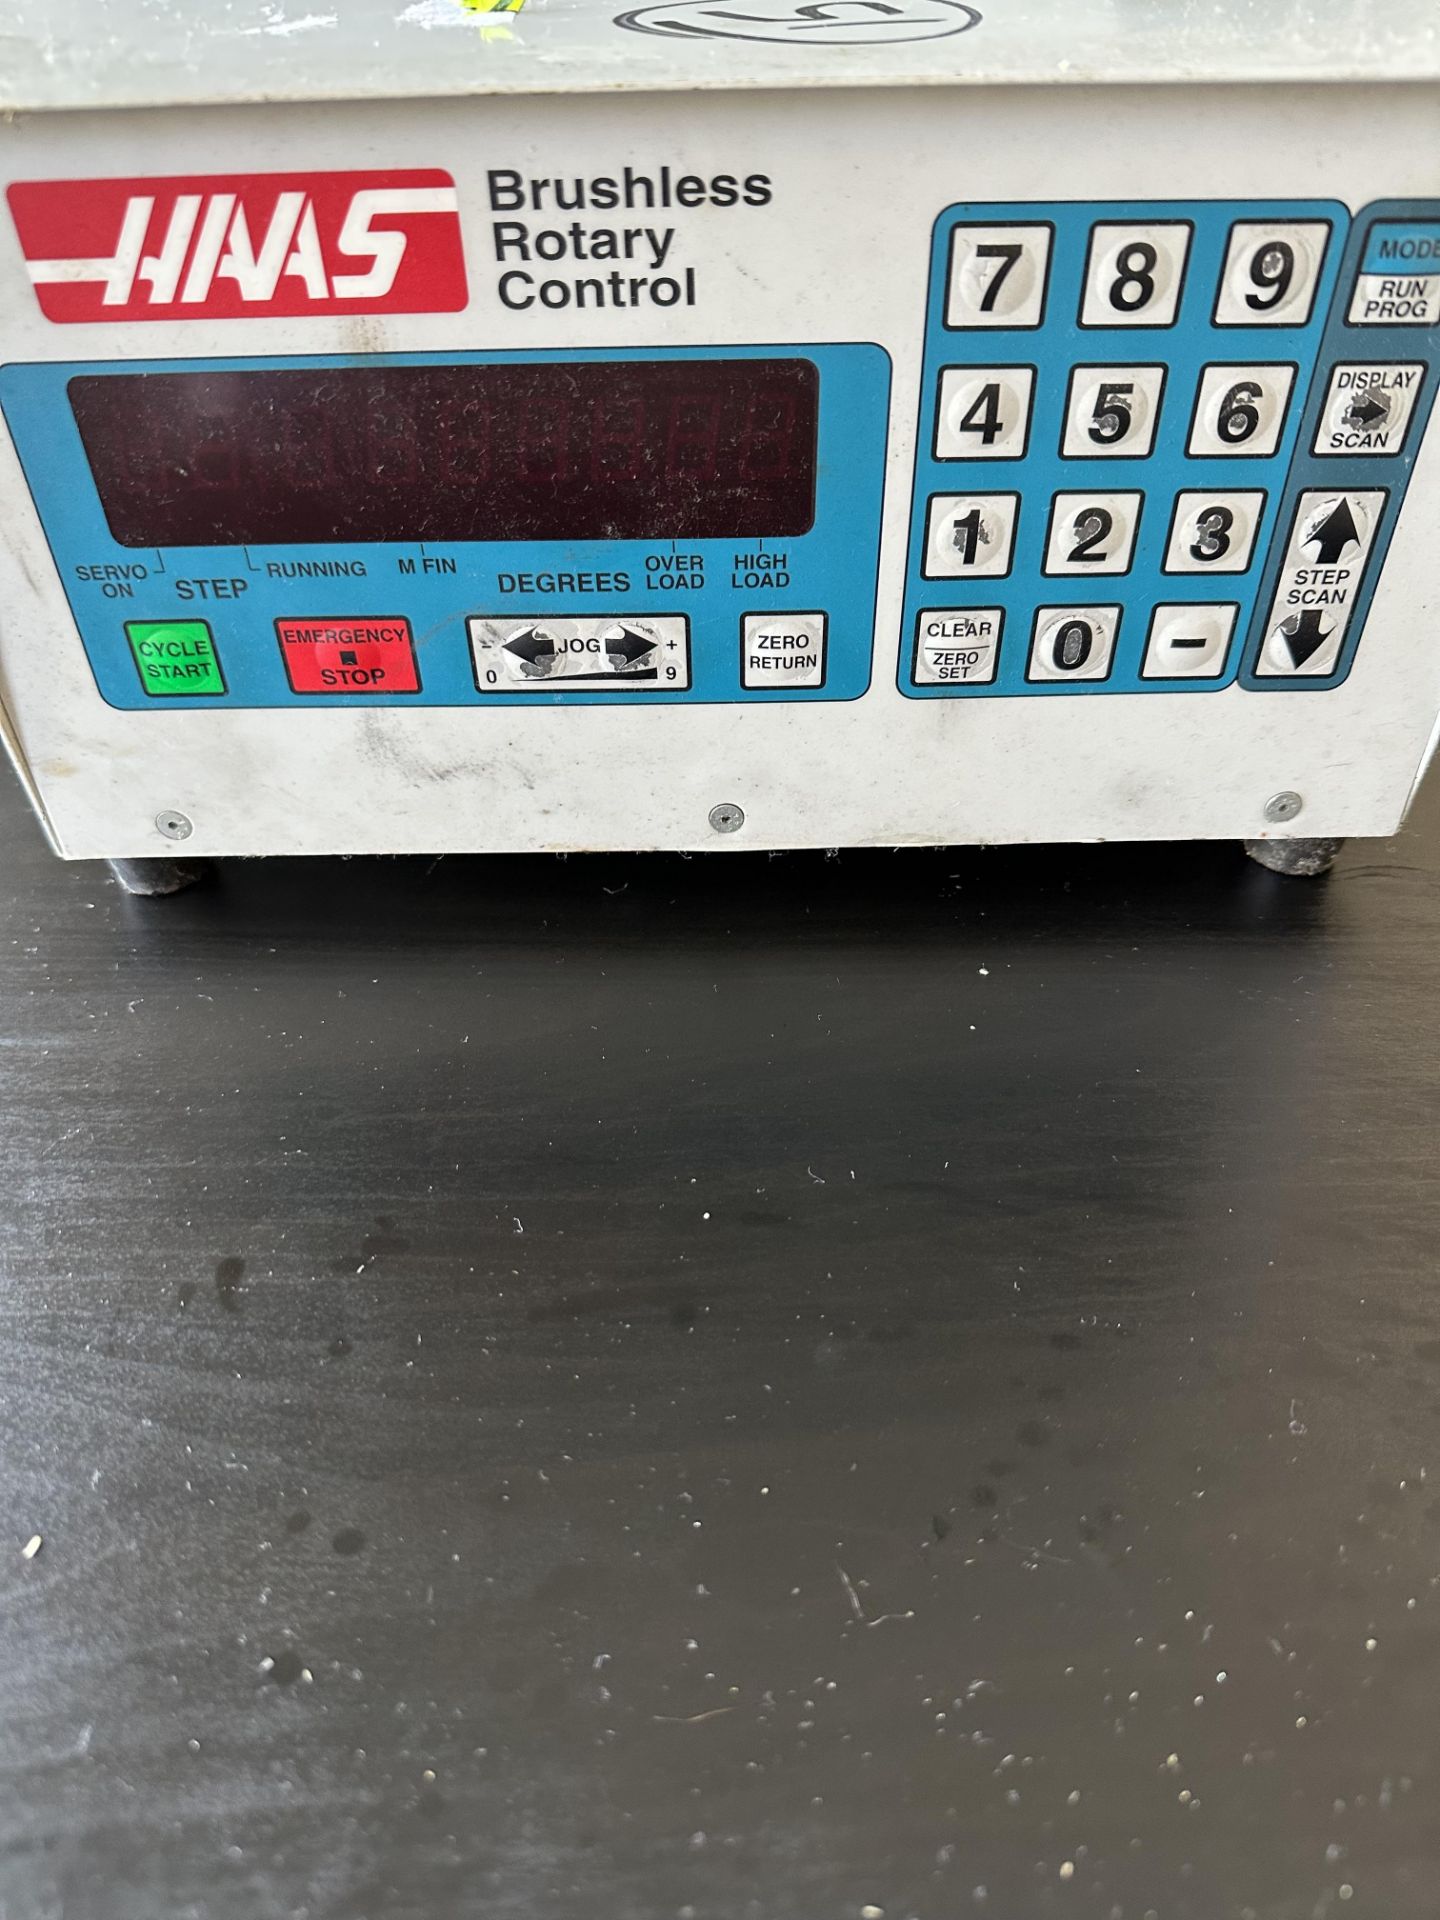 HAAS Brushless Rotary Control Box